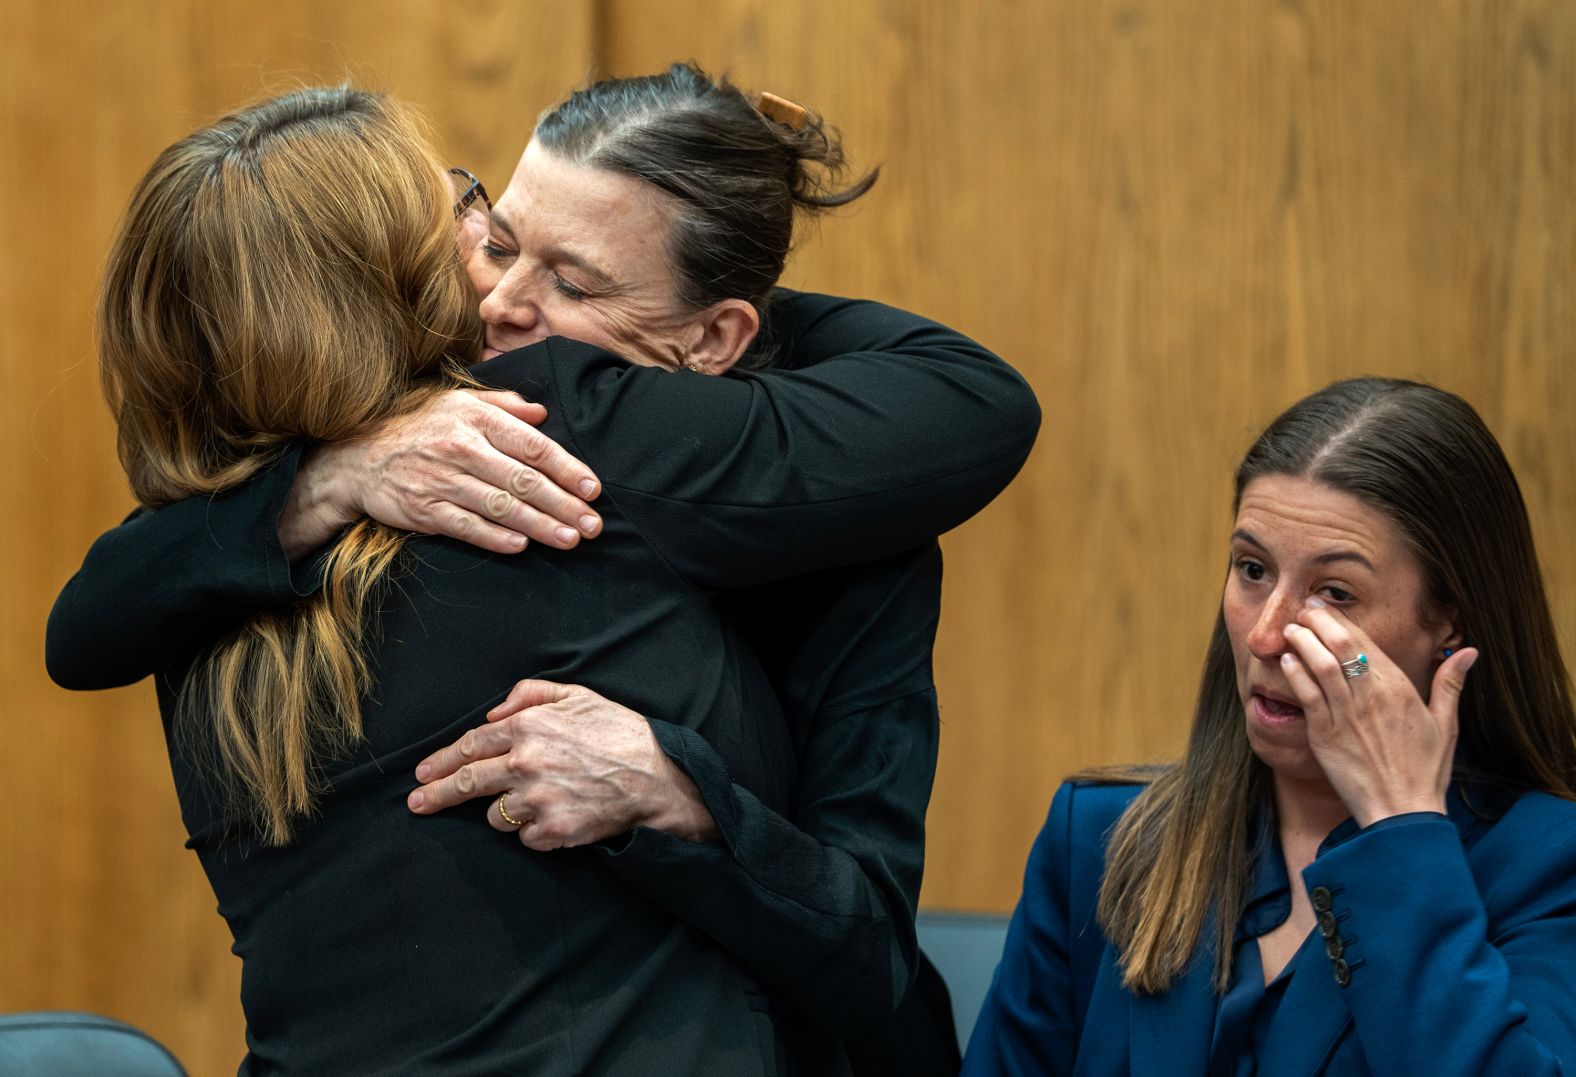 Dr. Giovannina Anthony, second from left, hugs her attorney after a Wyoming district court judge <a href="index.php?page=&url=https%3A%2F%2Fwww.cnn.com%2F2023%2F03%2F22%2Fus%2Fwyoming-abortion-ban-restraining-order" target="_blank">temporarily blocked a state abortion ban</a> on Wednesday, March 22. Anthony, an OB-GYN, was a plaintiff in a lawsuit challenging the ban.